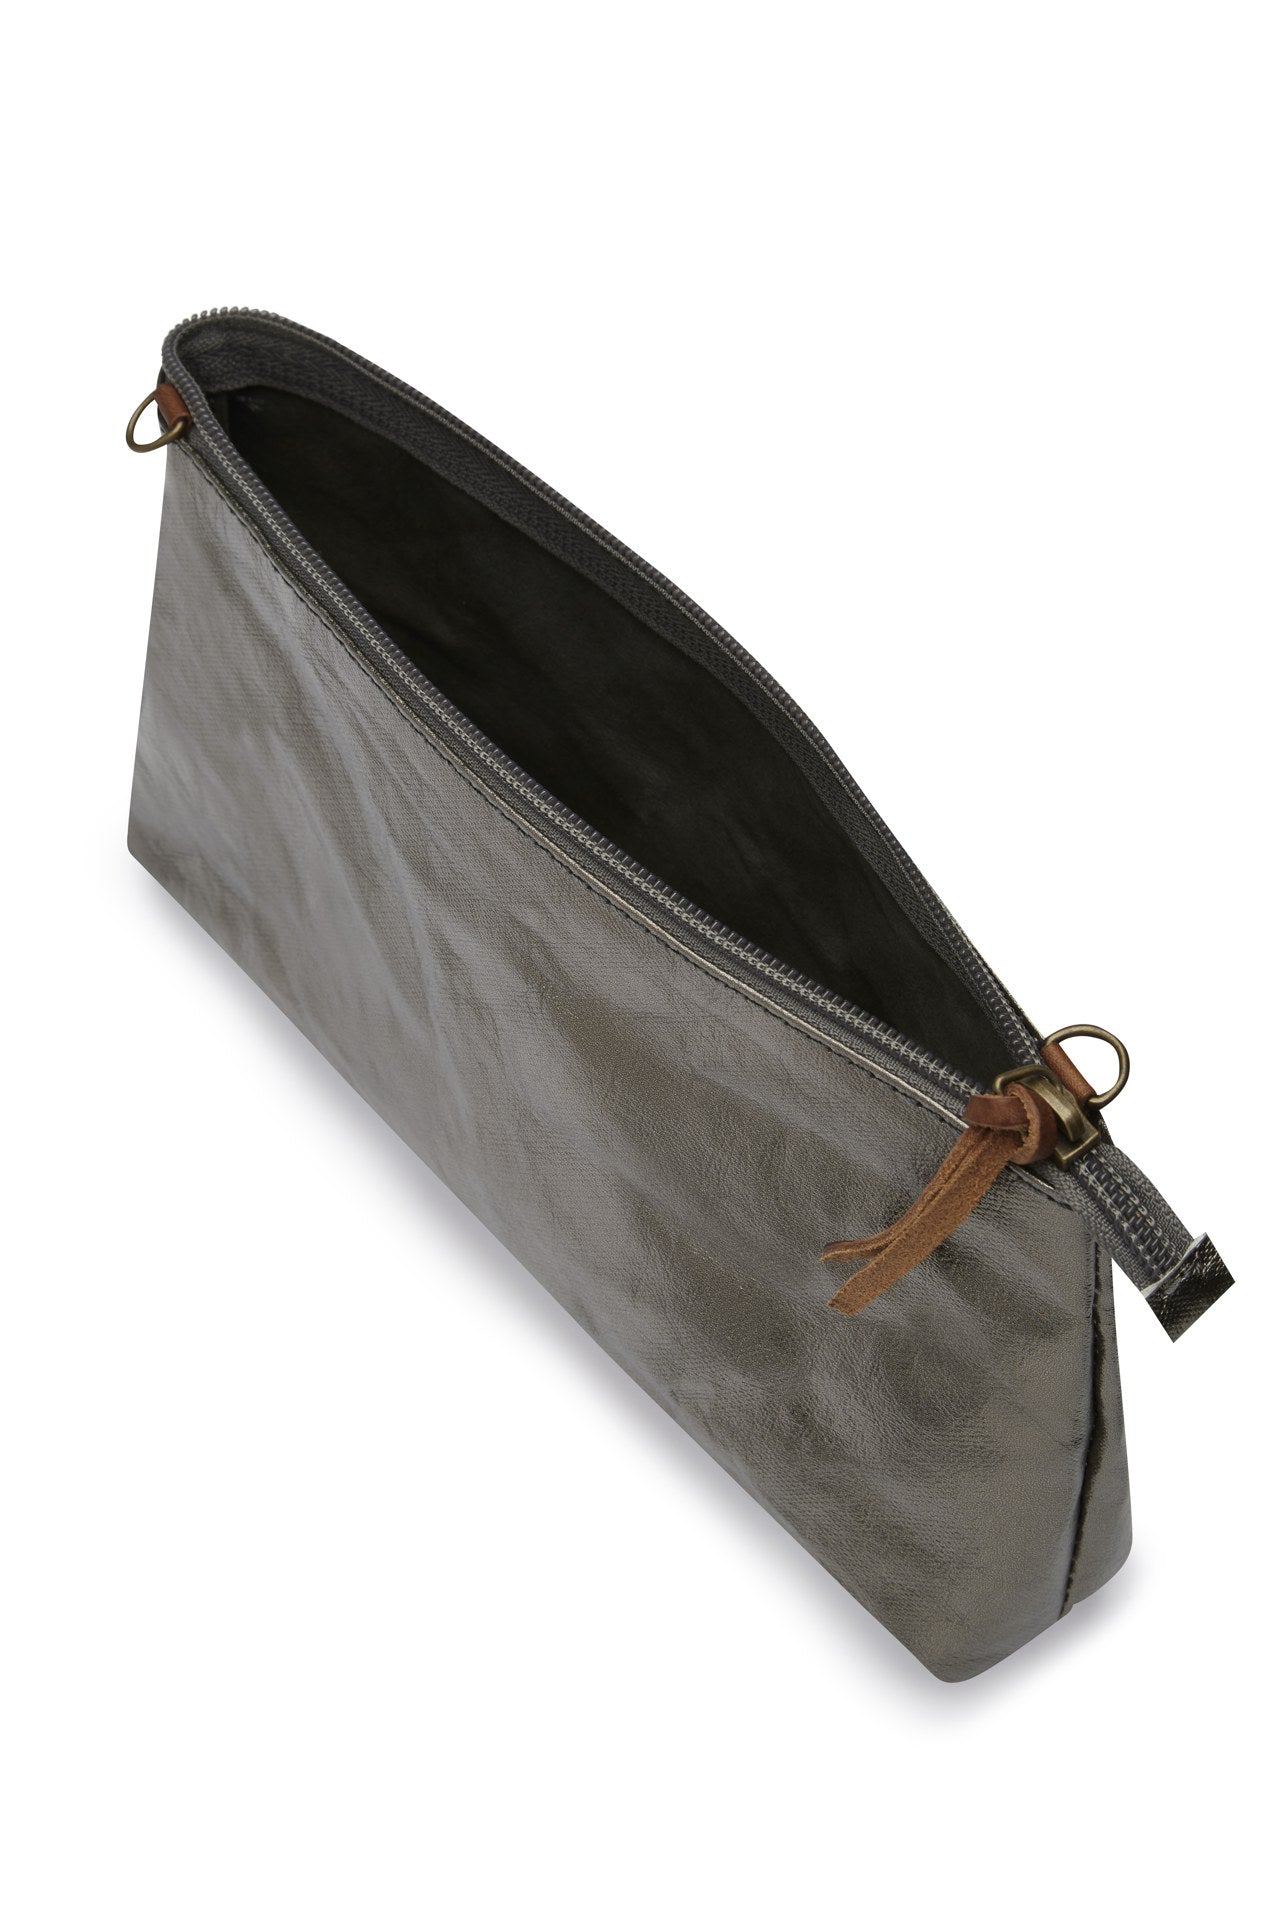 Filson Small Leather Pouch in Black